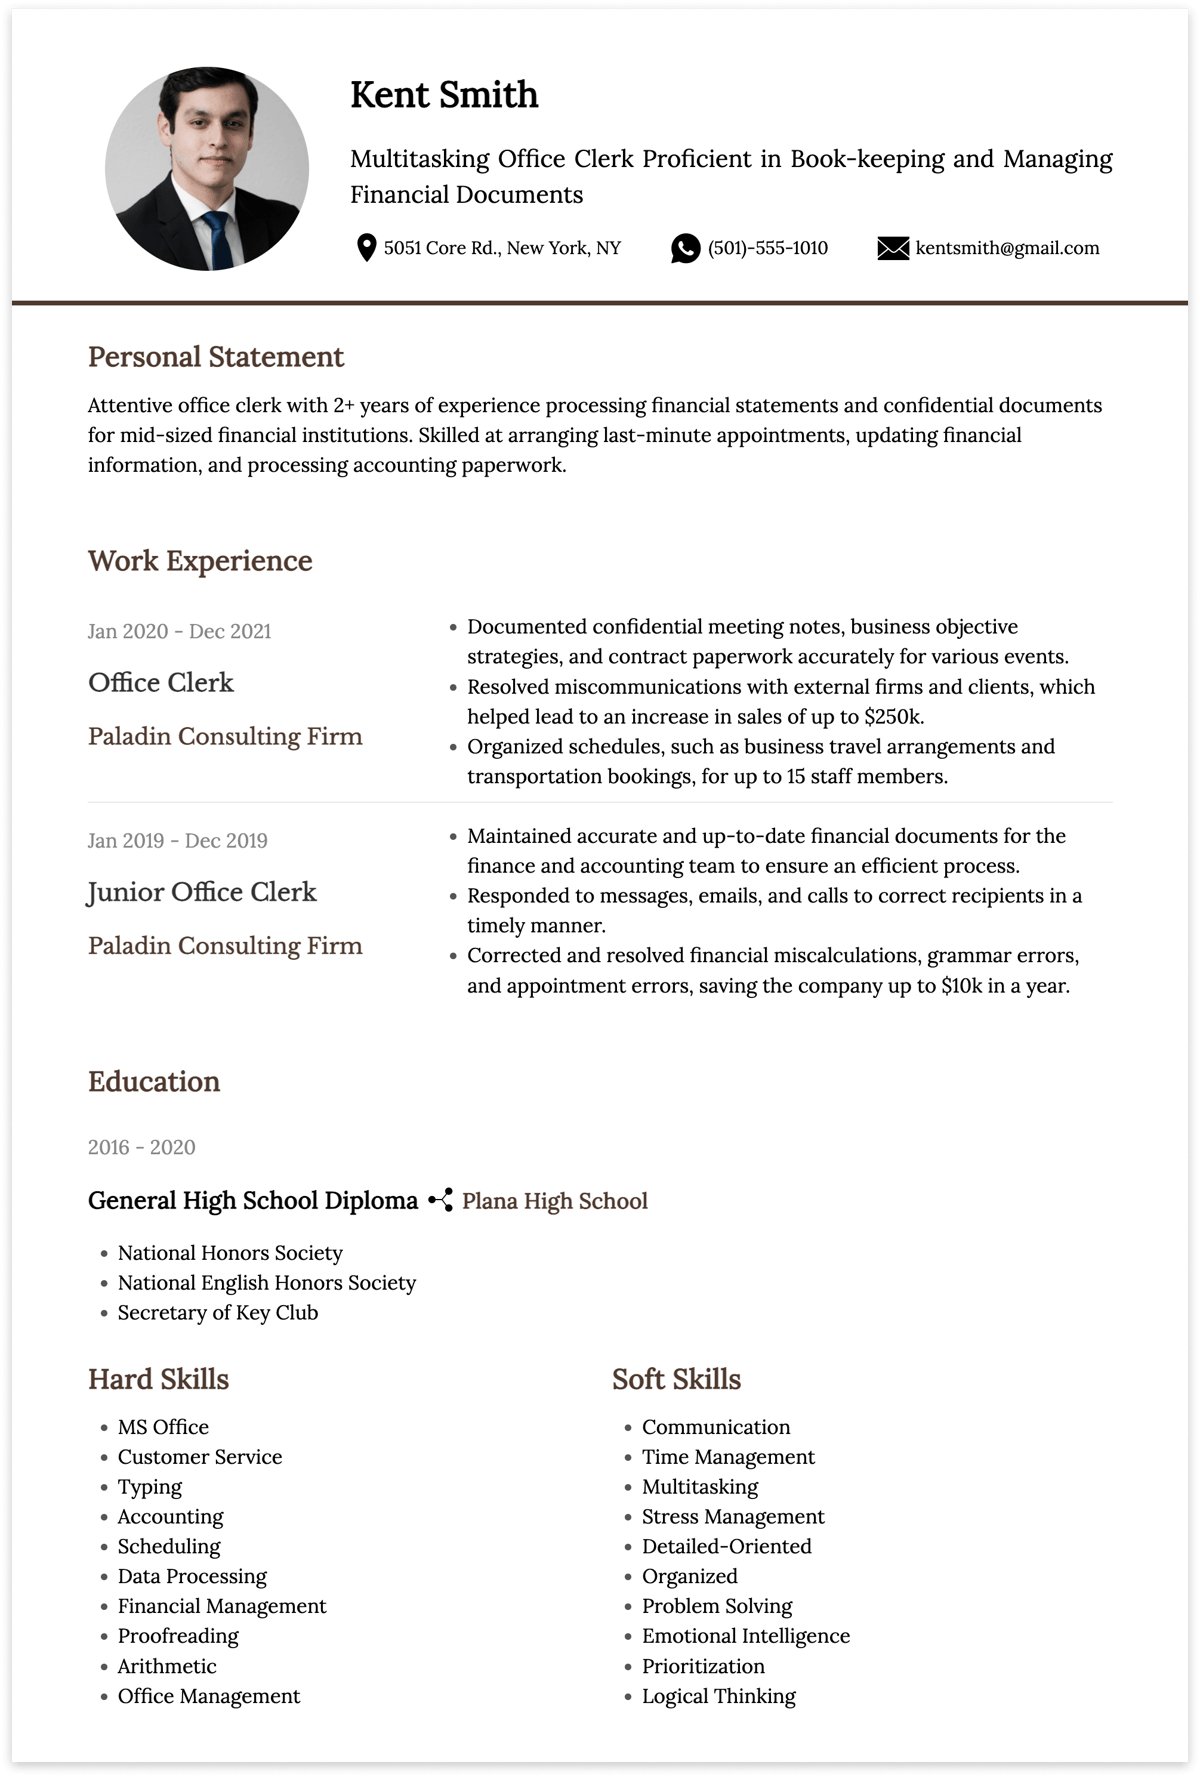 How to Write a Powerful Office Clerk Resume (+ Example) | CakeResume